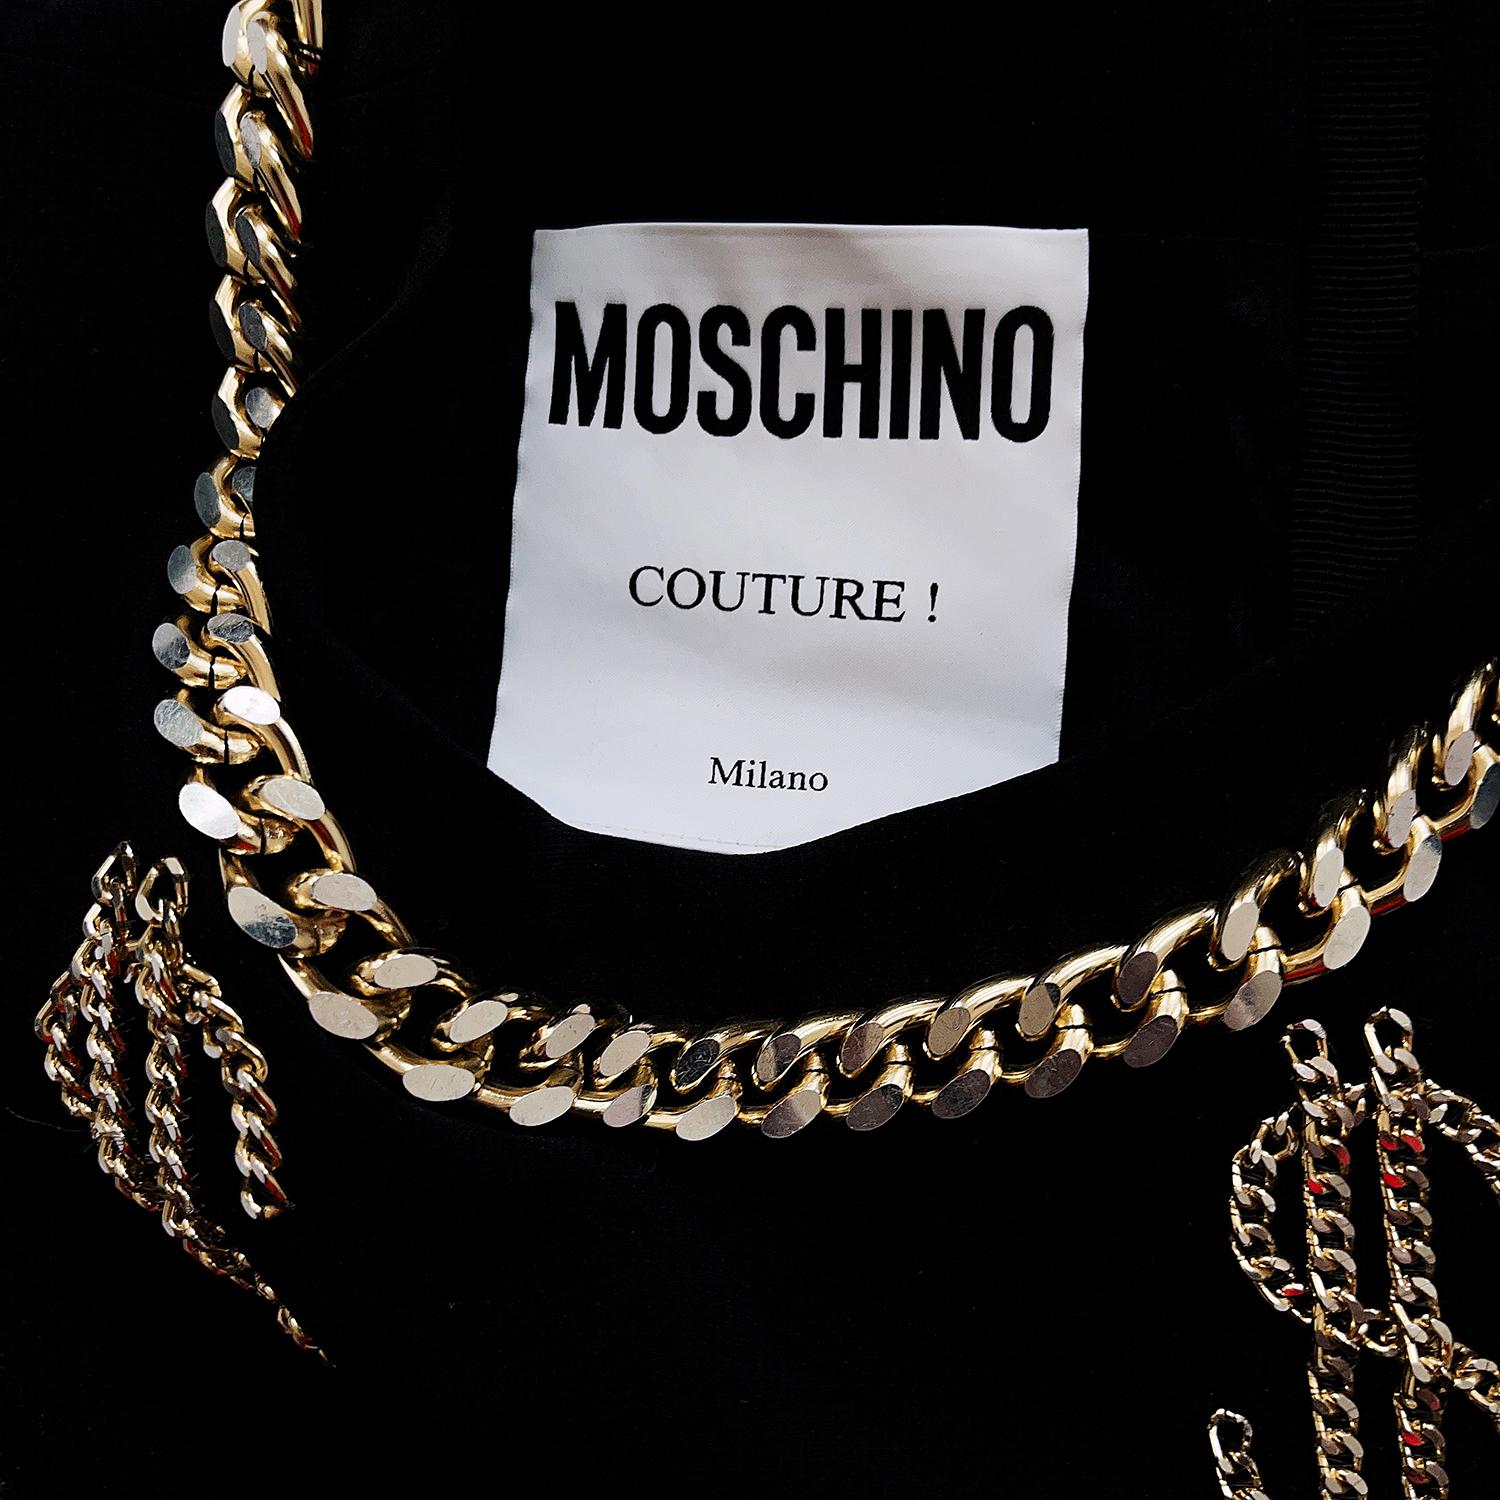 Iconique MOSCHINO Couture Dollar Sign Ensembe Black Dress Jacket Gold Chain Set  en vente 1